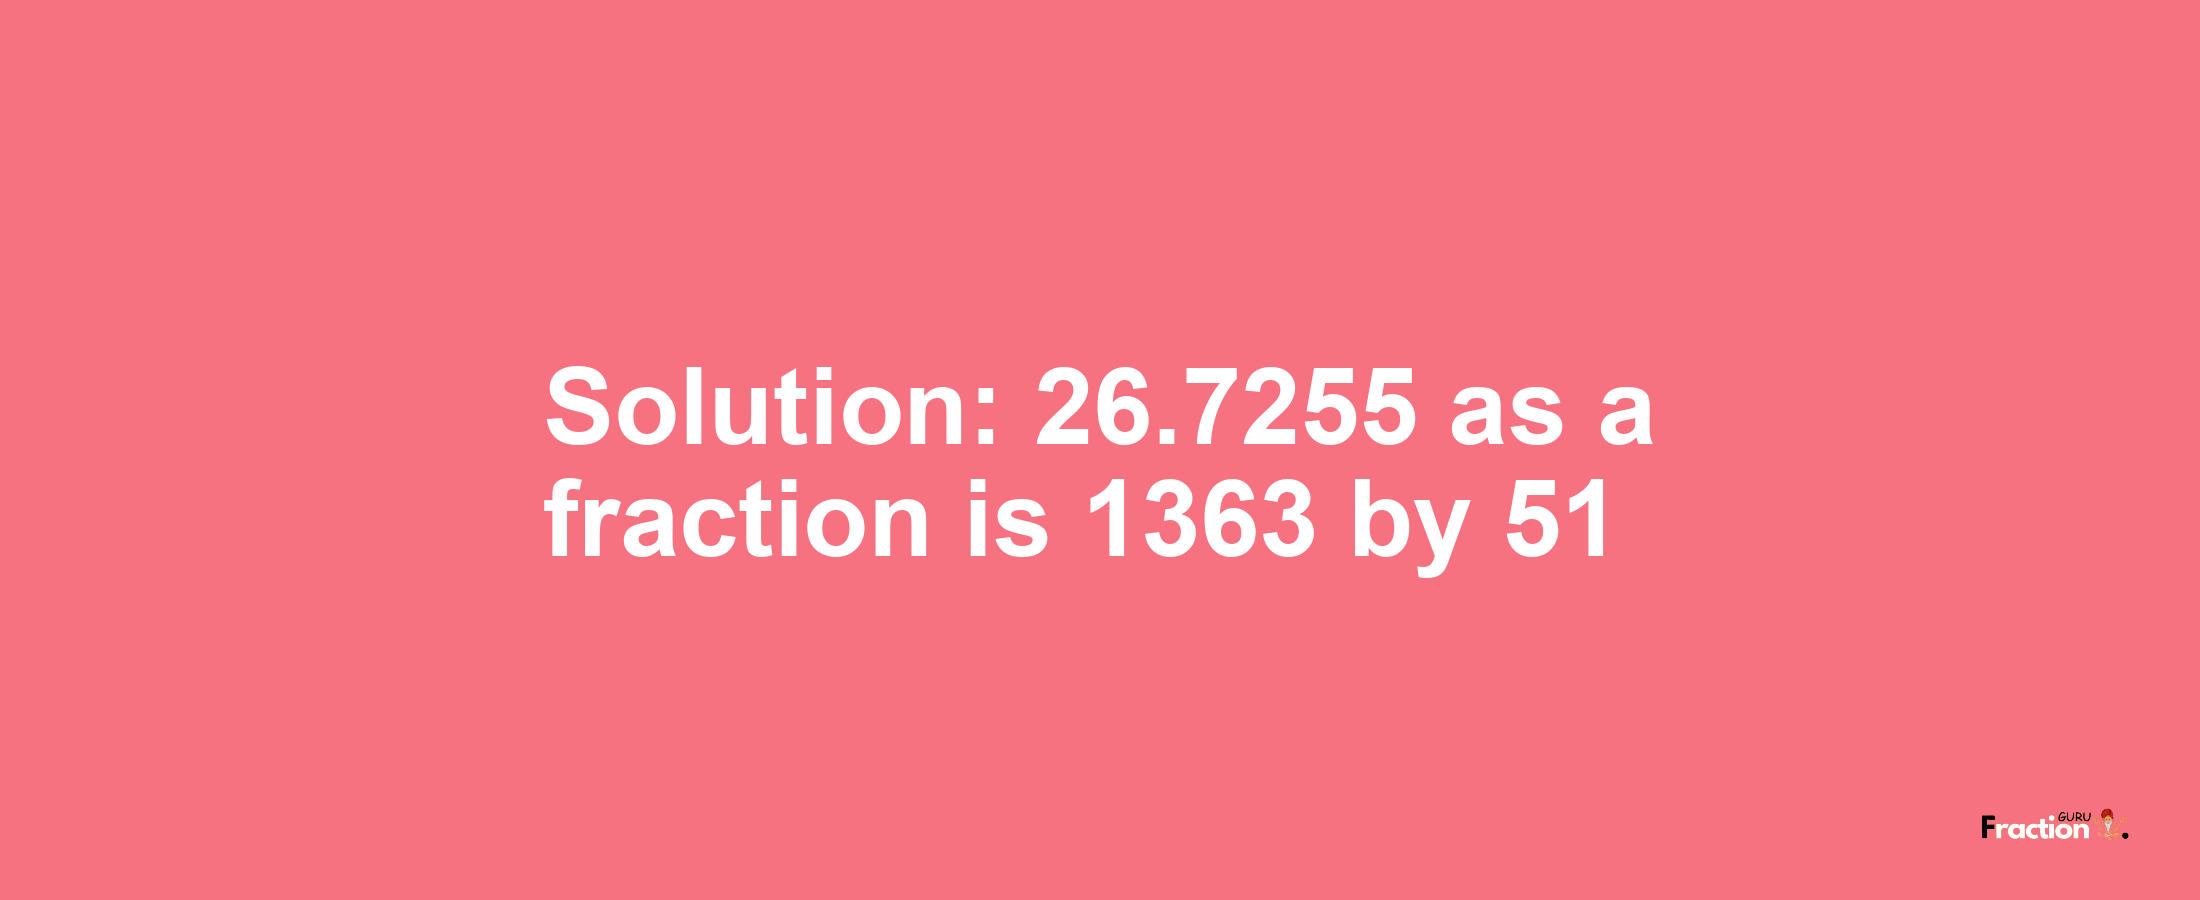 Solution:26.7255 as a fraction is 1363/51